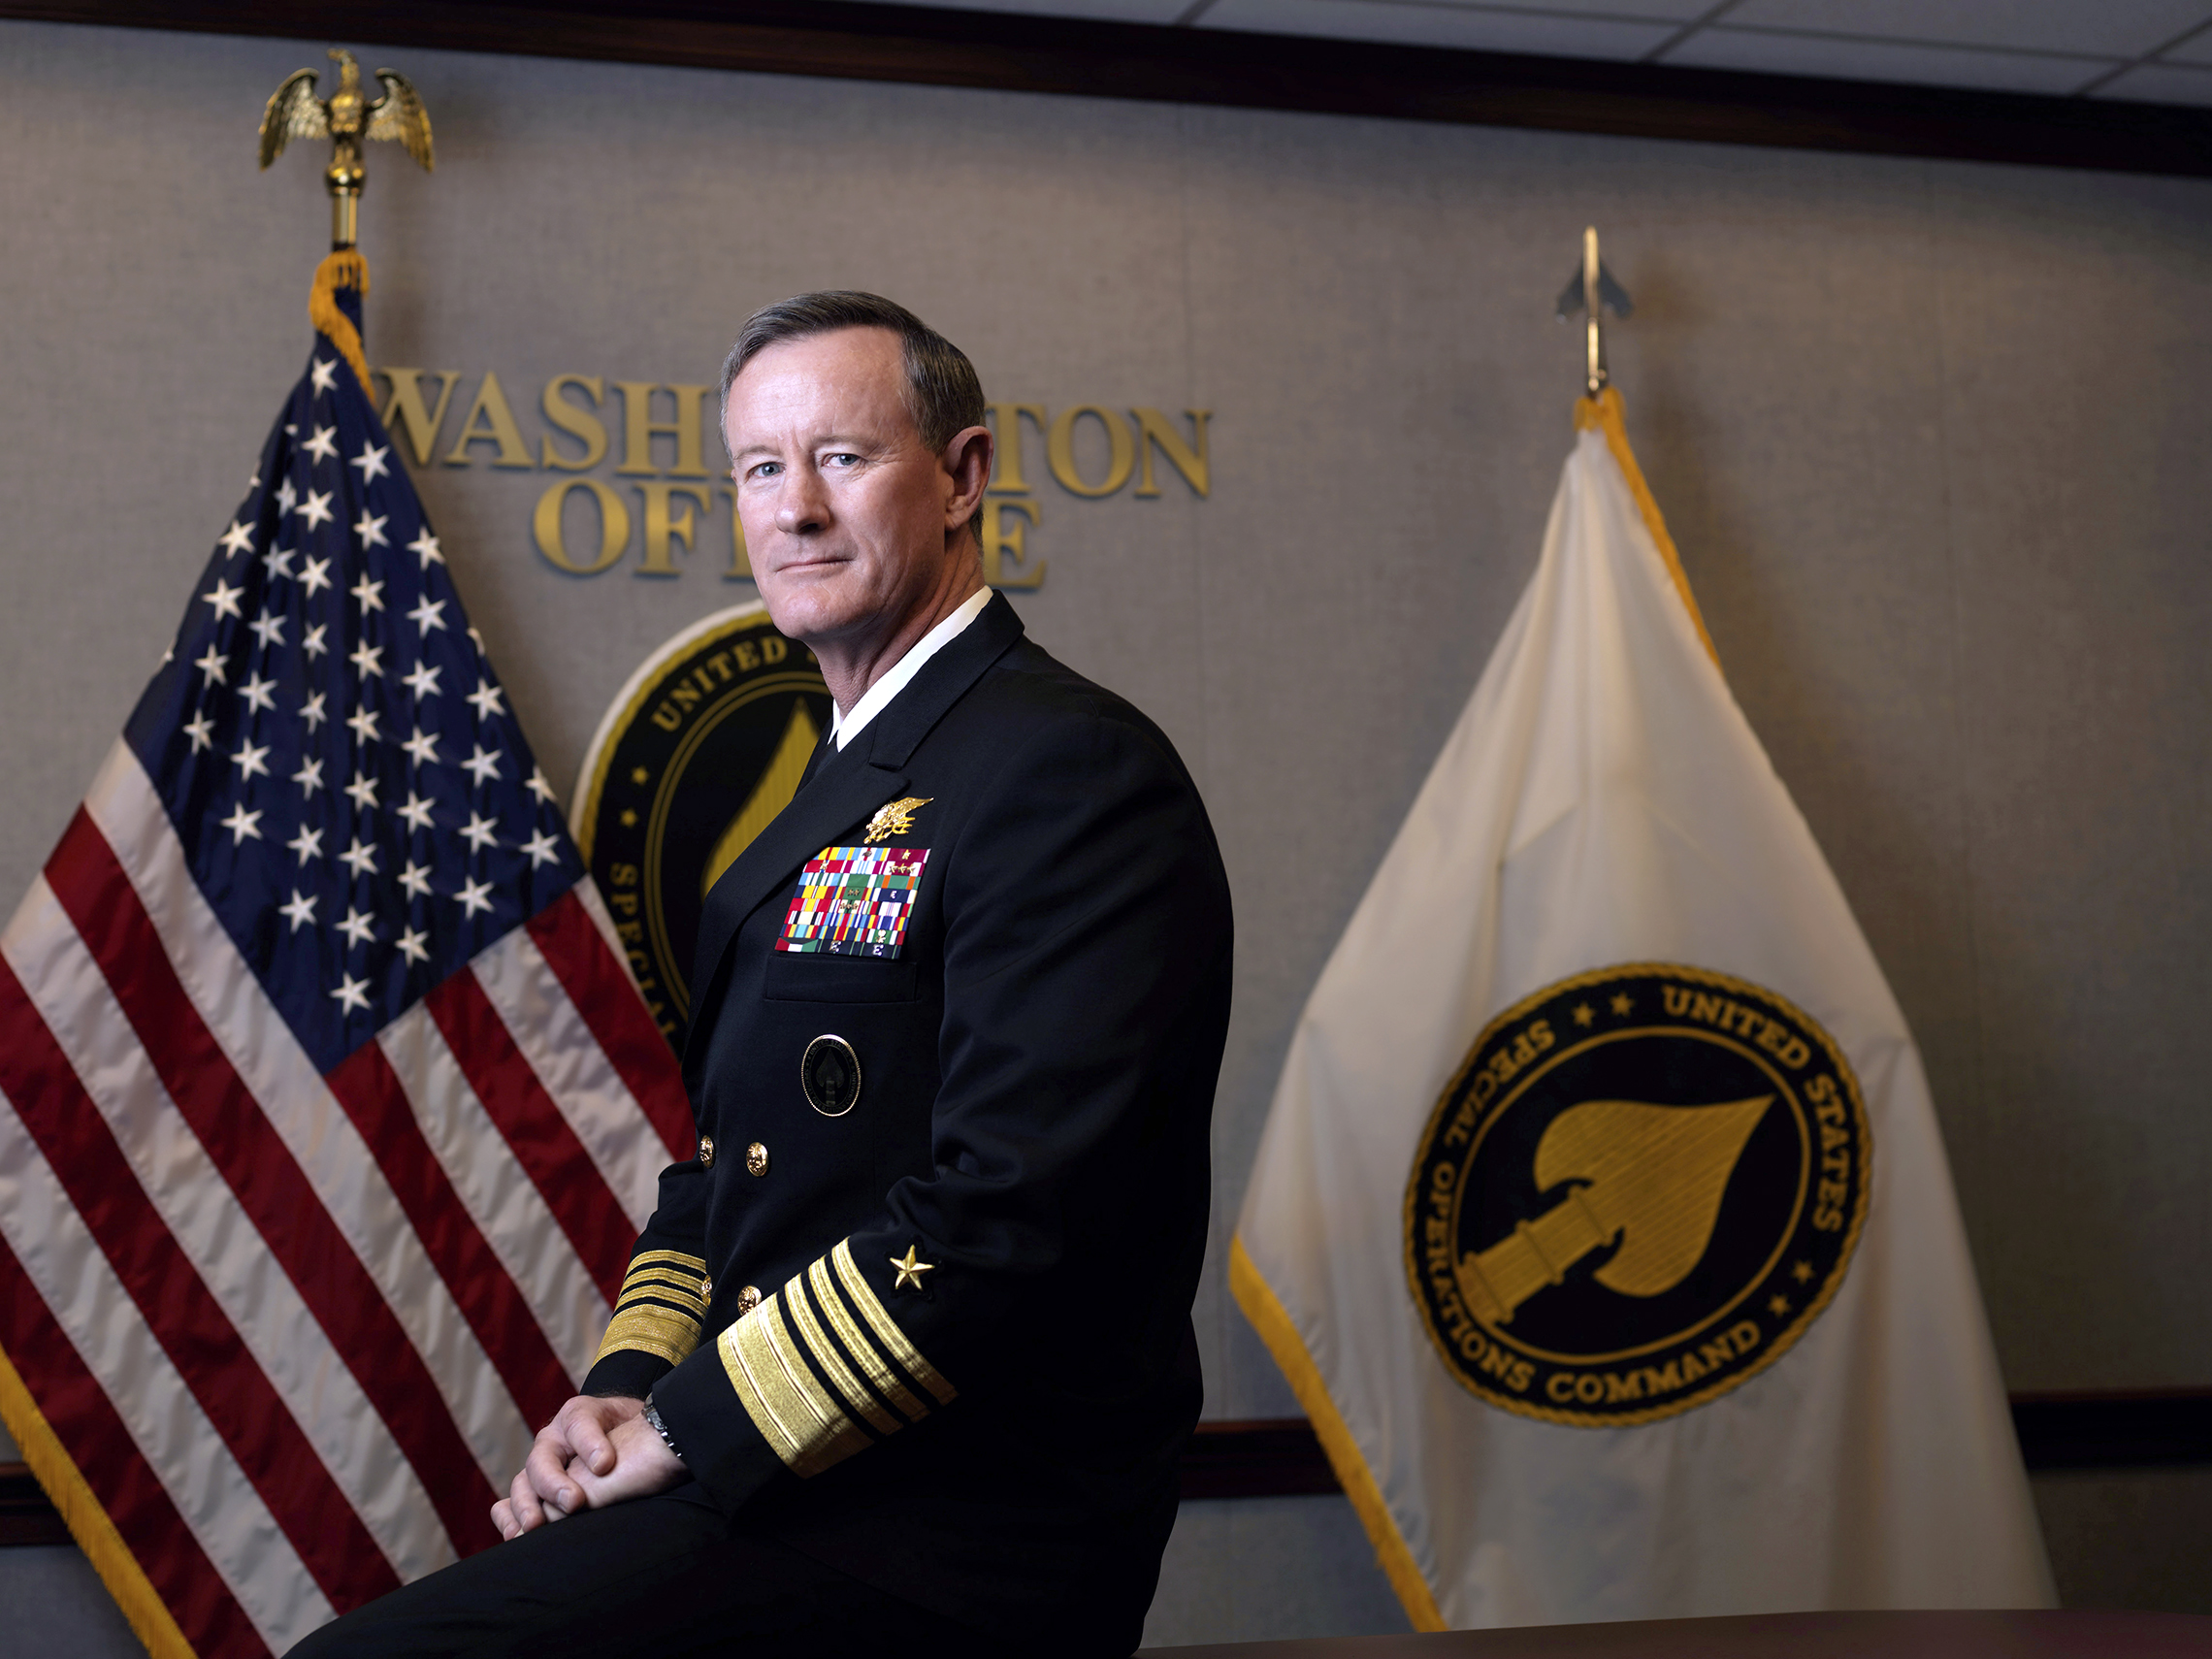 2013: Admiral William McRaven, Commander of the United States Special Operations Command at the Pentagon in Washington, D.C. (Sebastien Micke/Paris Match/Contour by Getty Images)